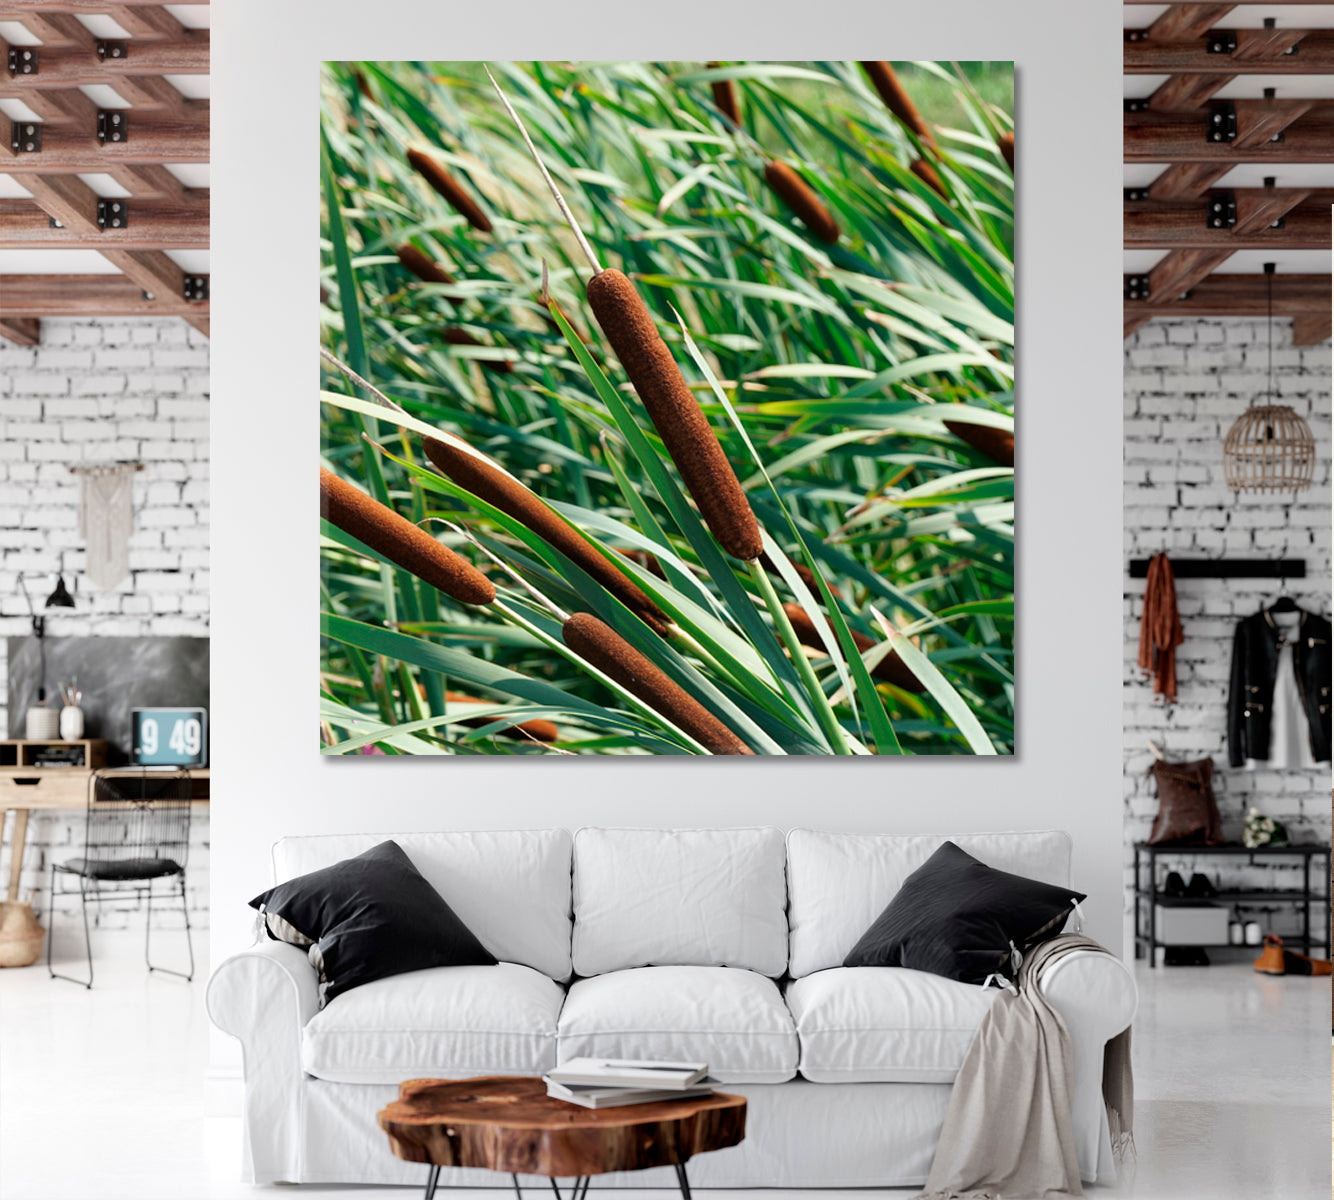 Colorful Green Reeds with Cattail - Square Panel Floral & Botanical Split Art Artesty 1 Panel 12"x12" 